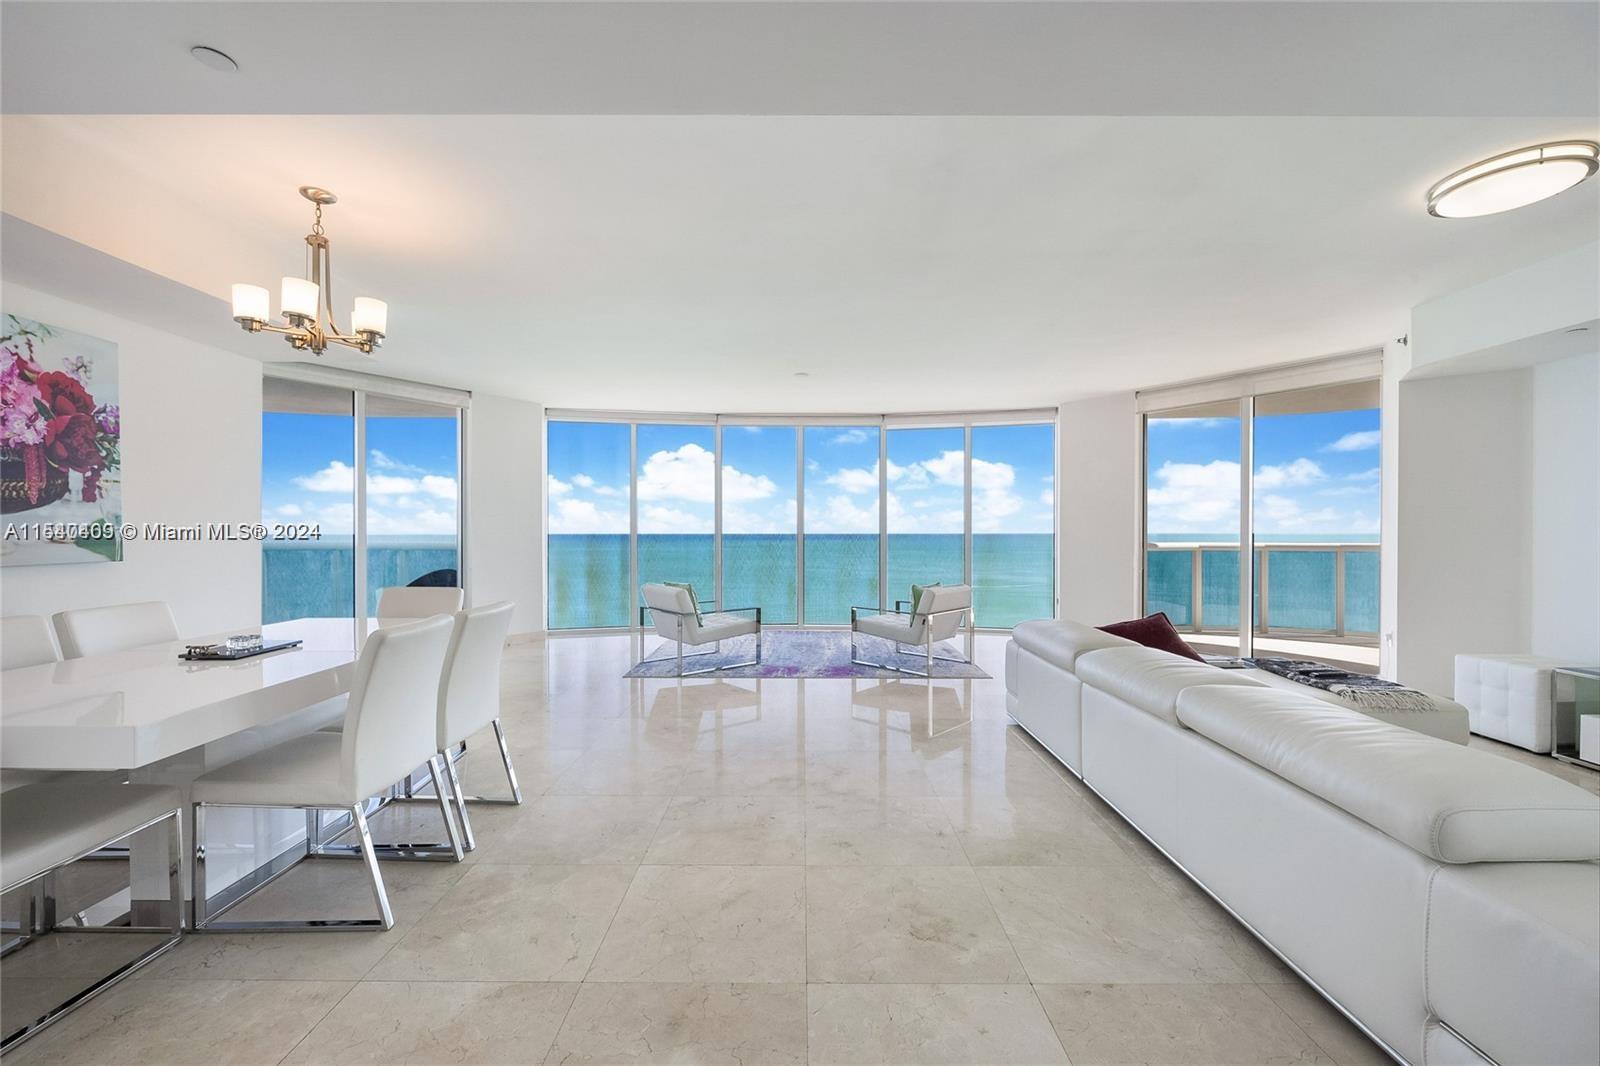 RESORT EXECUTIVE LIVING IN OCEANFRONT LUXURIOUS RESIDENCE WITH PANORAMIC BREATHTAKING 180 DEGREES OF UNOBSTRUCTED OCEAN VIEWS! RARELY AVAILABLE HIGH FLOOR BEST LAYOT! THIS HIGHLY DESIRABLE UNIT IS THE BEST ON SUNNY ISLES, FLOOR TO CEILING WINDOWS, ALL 3 BEDROOMS, AND 2 BALCONIES WITH DIRECT OCEAN VIEWS, FIVE STAR WELL MANAGED BUILDING. BEACHFRONT RESTAURANT. ITALIAN MARBLE FLOORS, ITALIAN STYLE KITCHEN, MIELE APPLIANCES, SUB-ZERO REFRIGERATOR, DESINER'S CUSTOM MADE LEATHER FINISHED CLOSETS. CABLE TV, HBO, HIGH-SPEED INTERNET, YOGA, PILATES, AND ZUMBA CLASSES, GYM AND STEAM ROOM, BEACH AND POOL SERVICE, TWO ASSIGNED PARKING SPOTS AND A/C STORAGE. CLOSE TO RESTAURANTS, GROCERIES, AND SHOPPING CENTER! 24-HOUR VALET AND SECURITY.